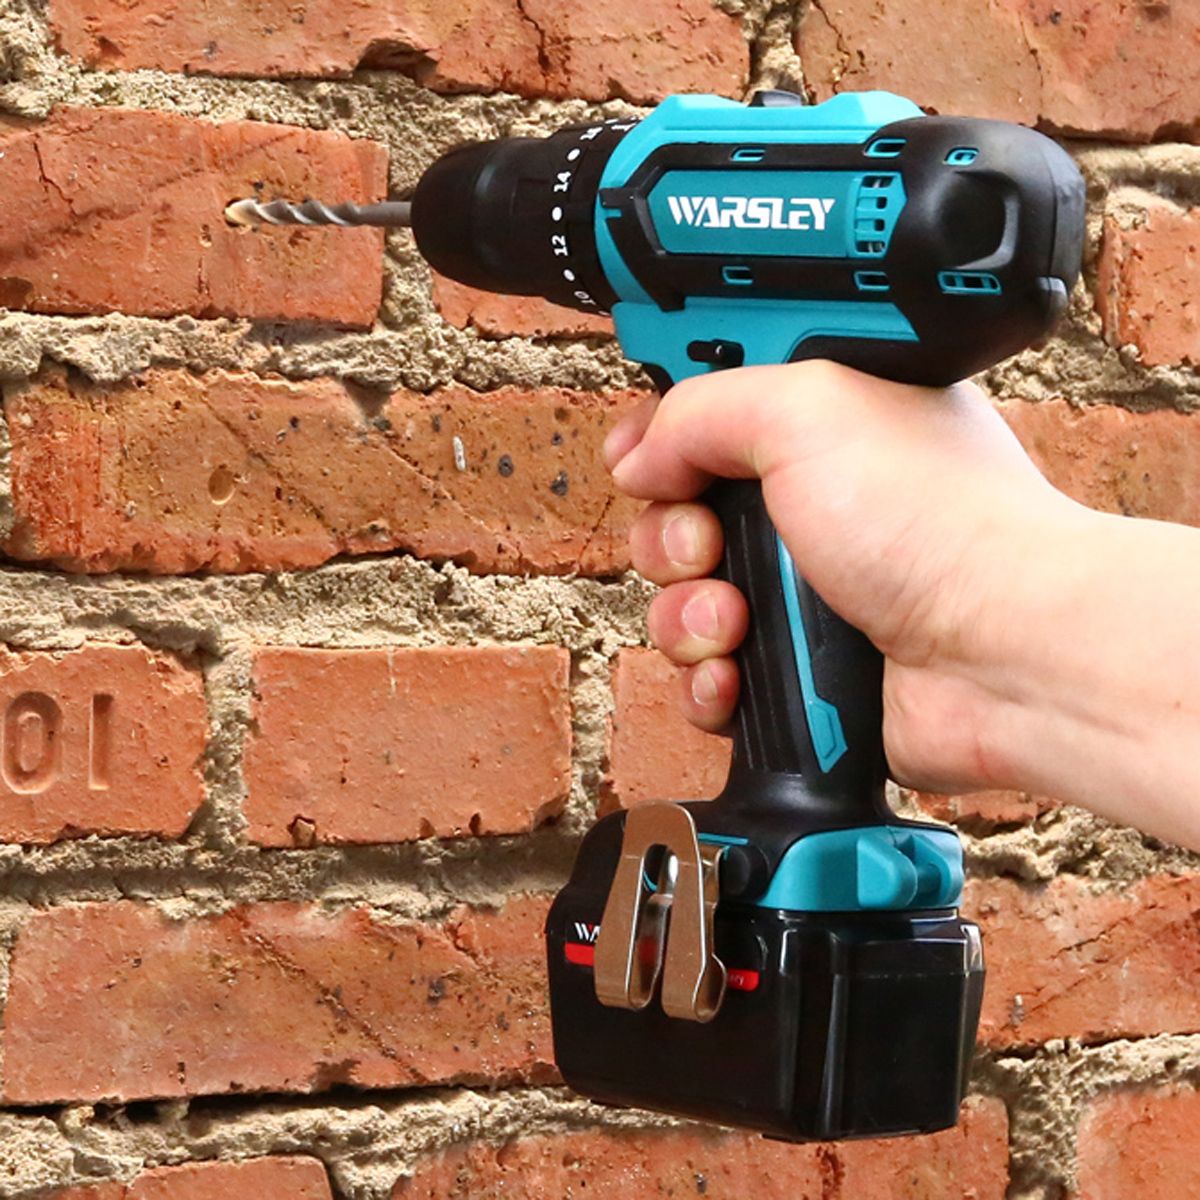 12V-Cordless-Electric-Impact-Drill-Multi-function-Hand-Hammer-Screwdriver-Lithium-Battery-Rechargabl-1452371